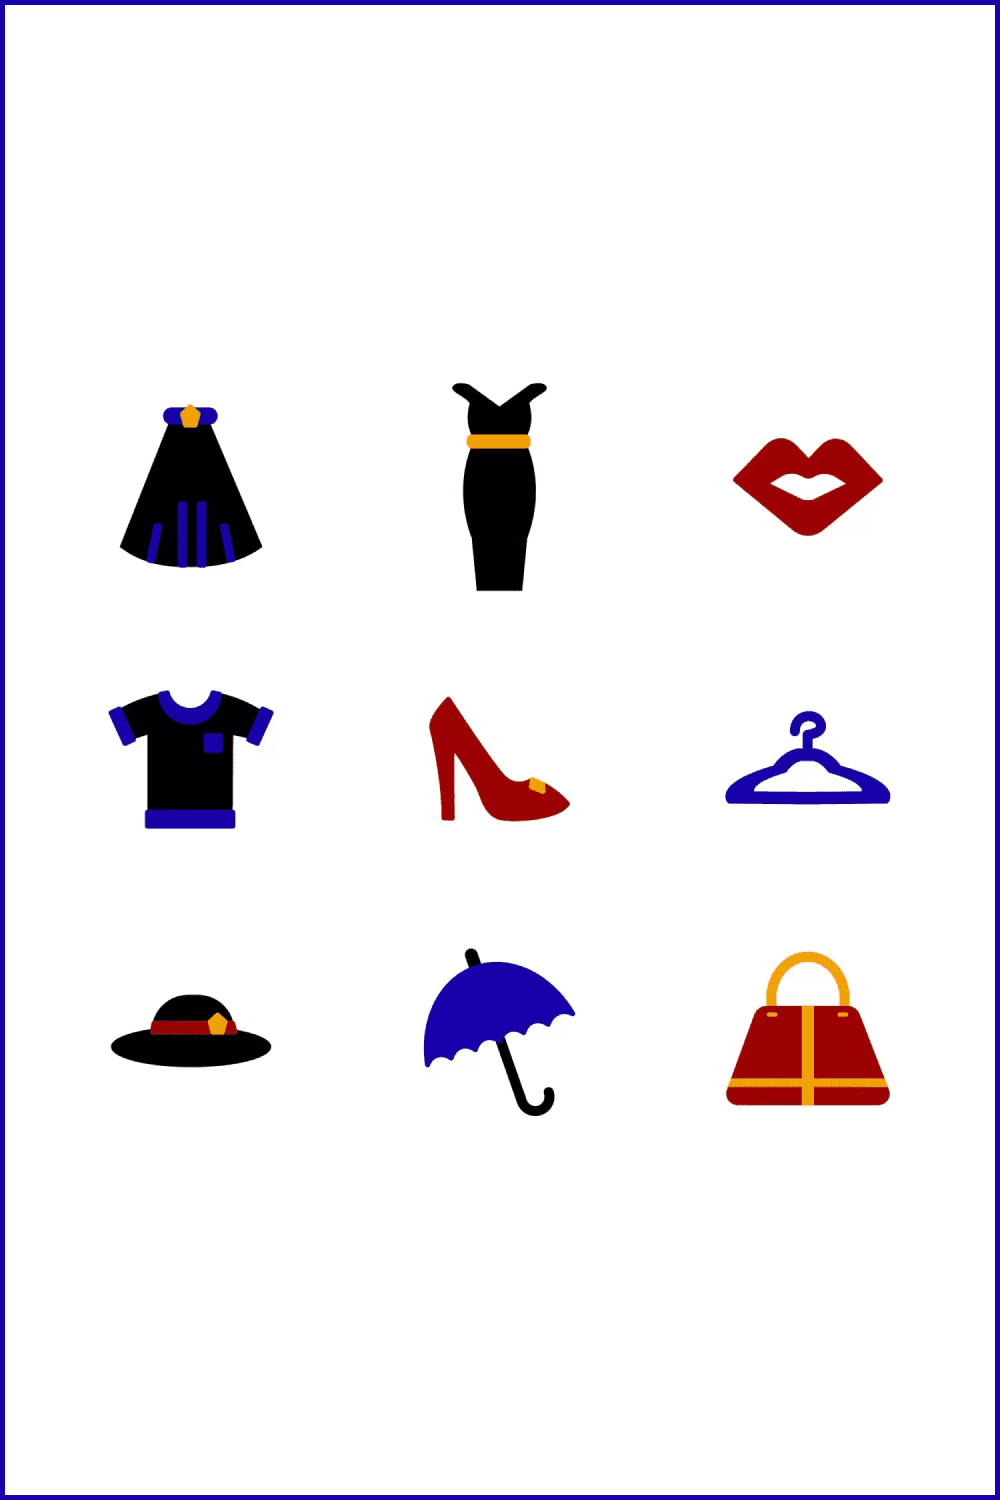 Collage of icons of dresses, shoes, hats, umbrellas, handbags, hangers.